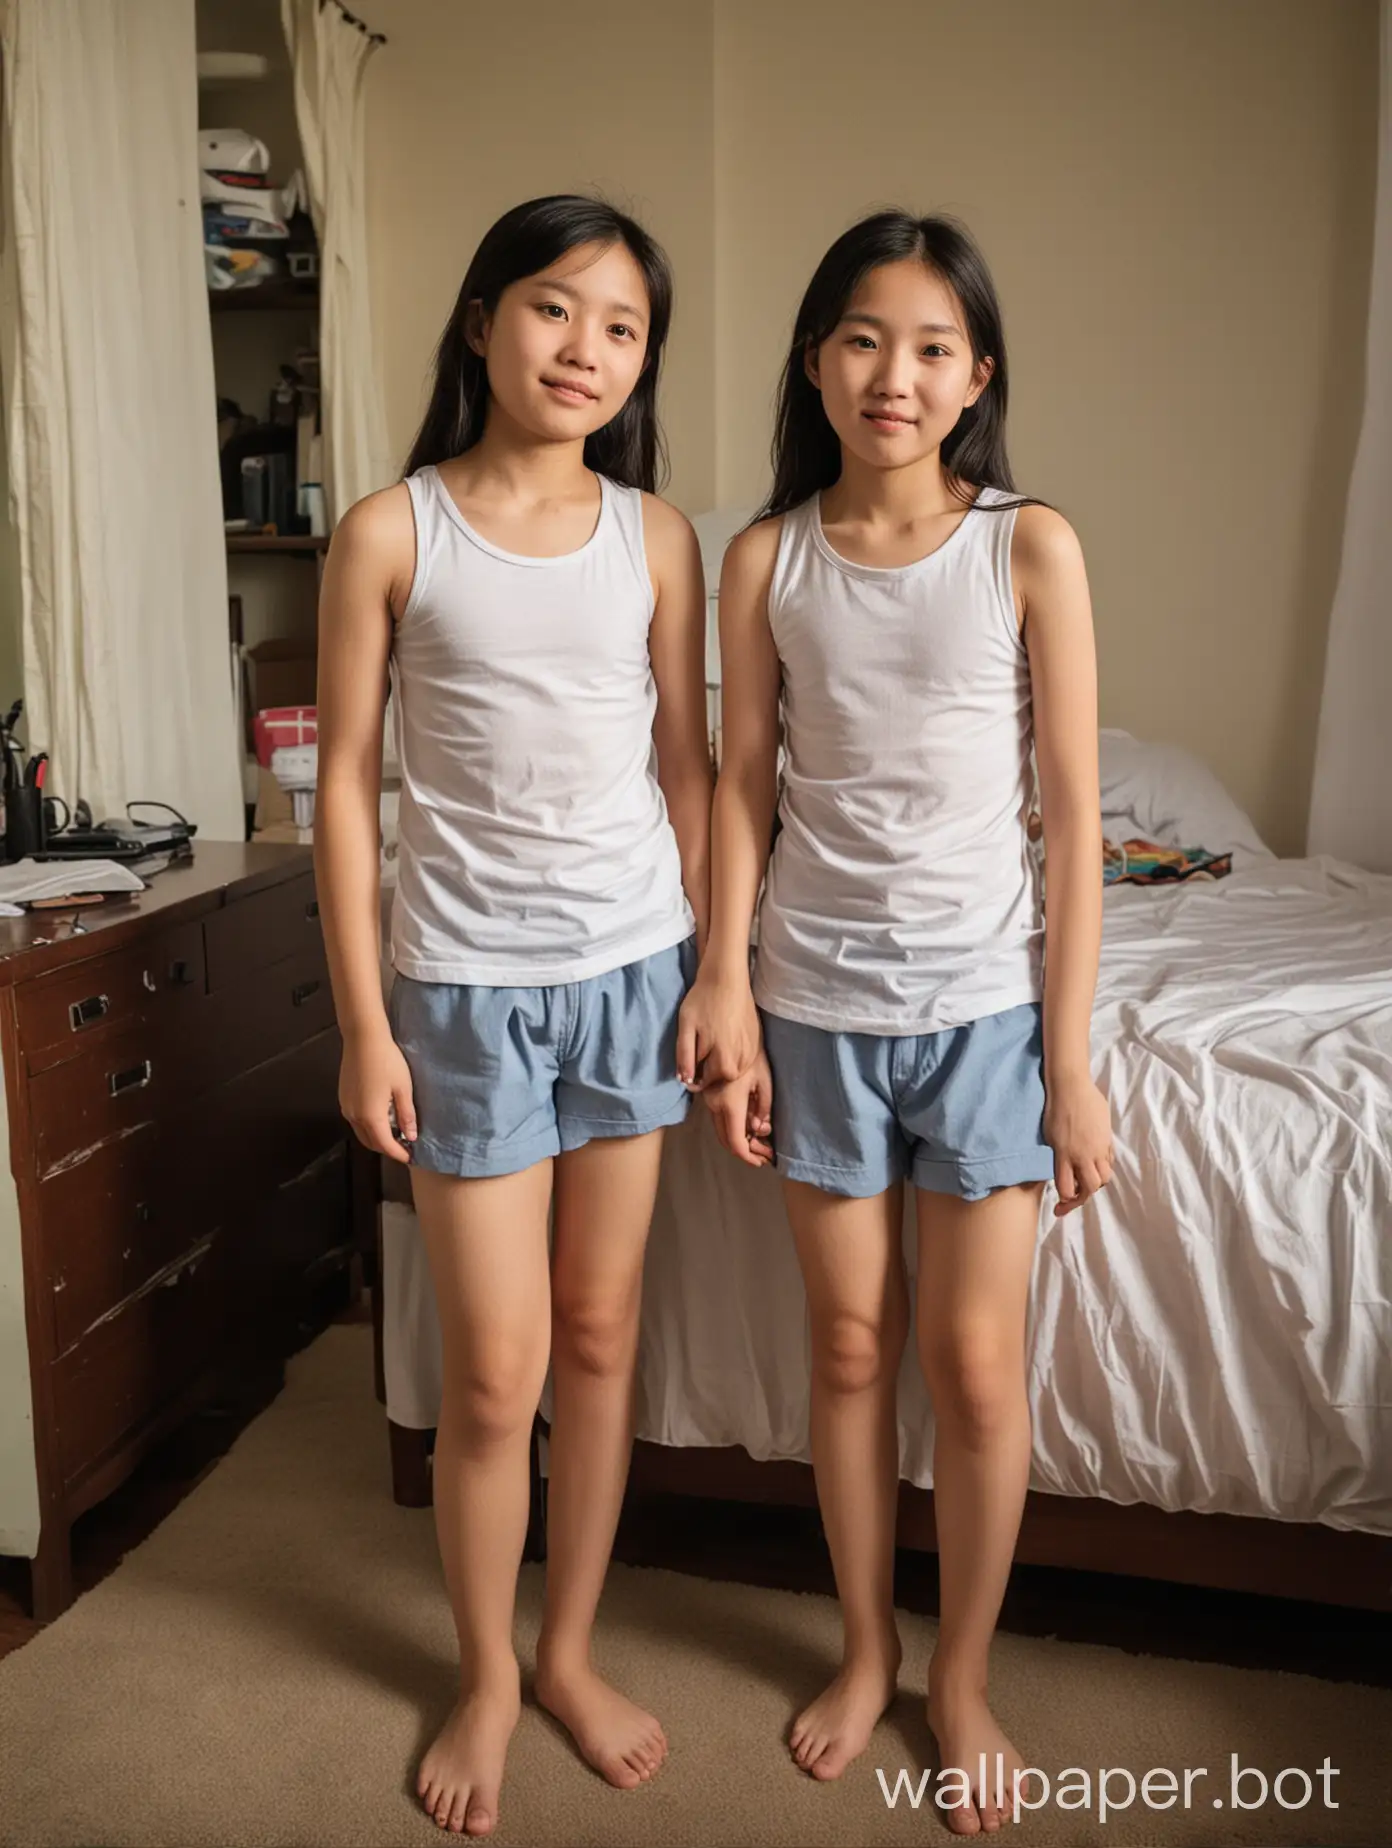 these 12-year-old and 14-year-old Taiwan sisters still haven't put on their shirts. They're casually playing in the room.